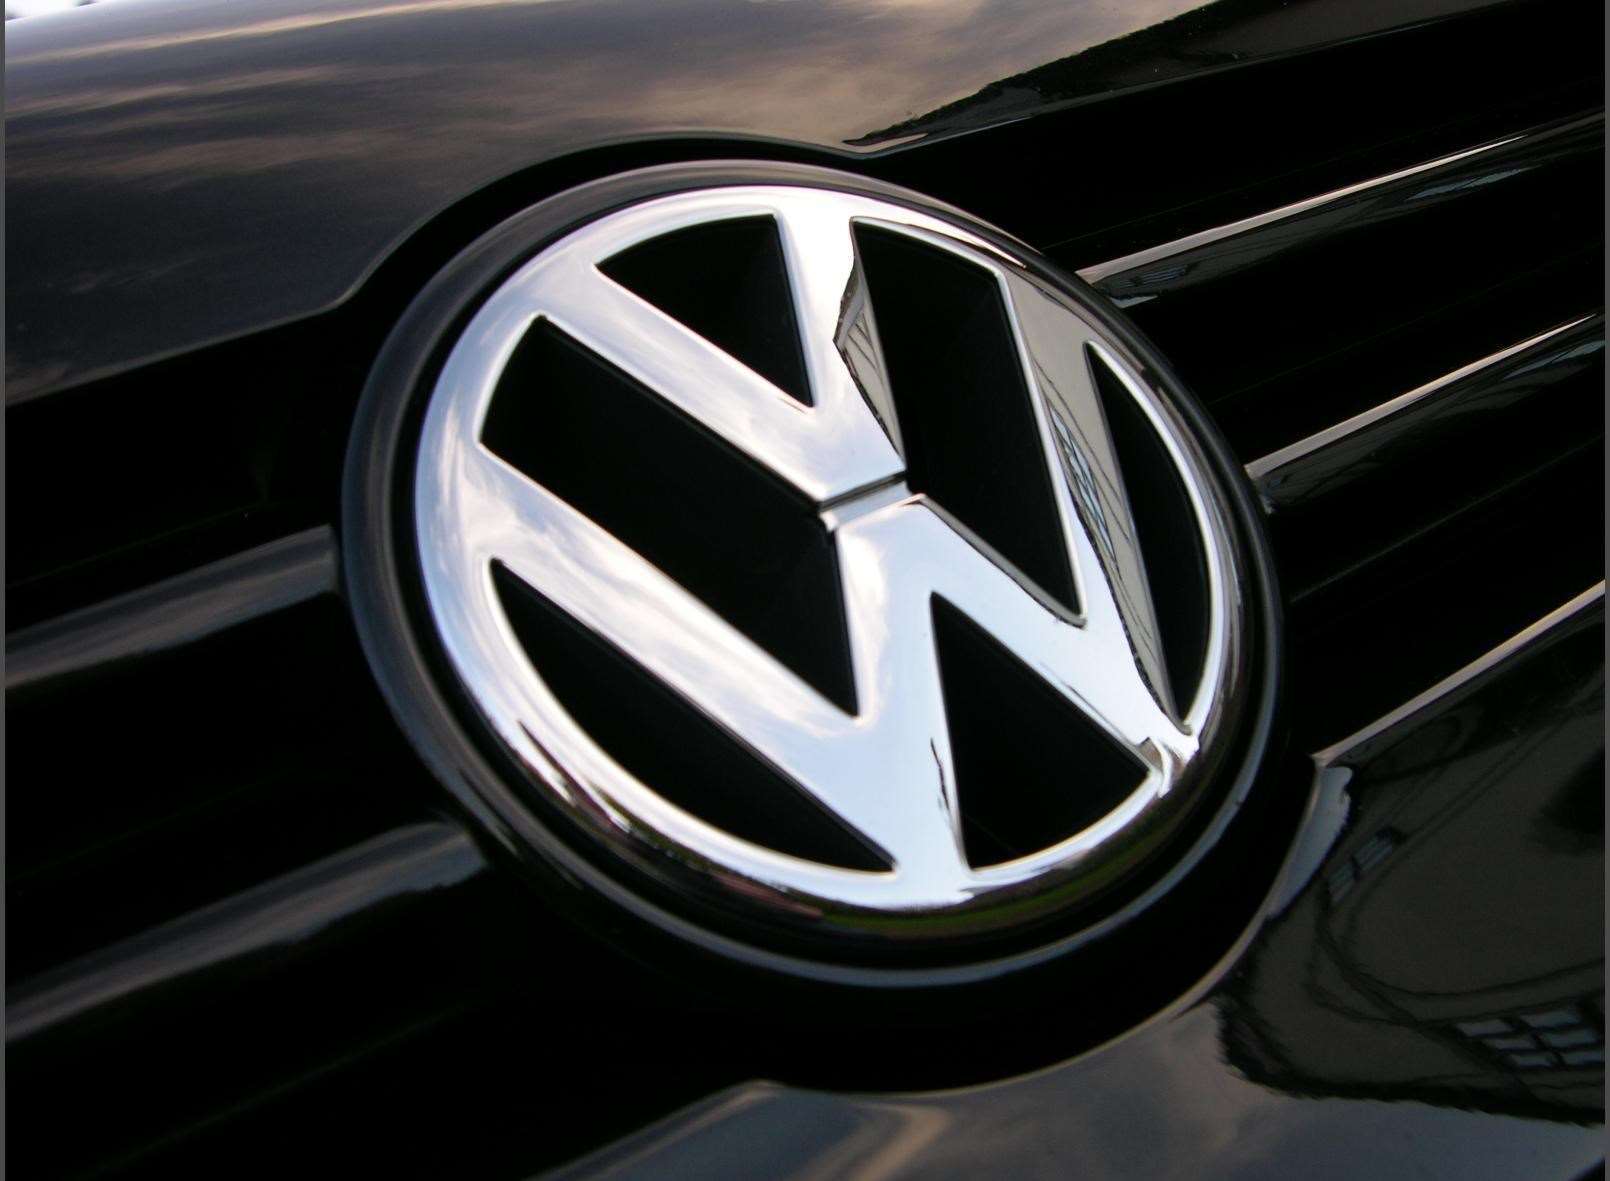 The emissions scandal at VW hampered sales of the brand for Motorline. Picture: The Car Spy